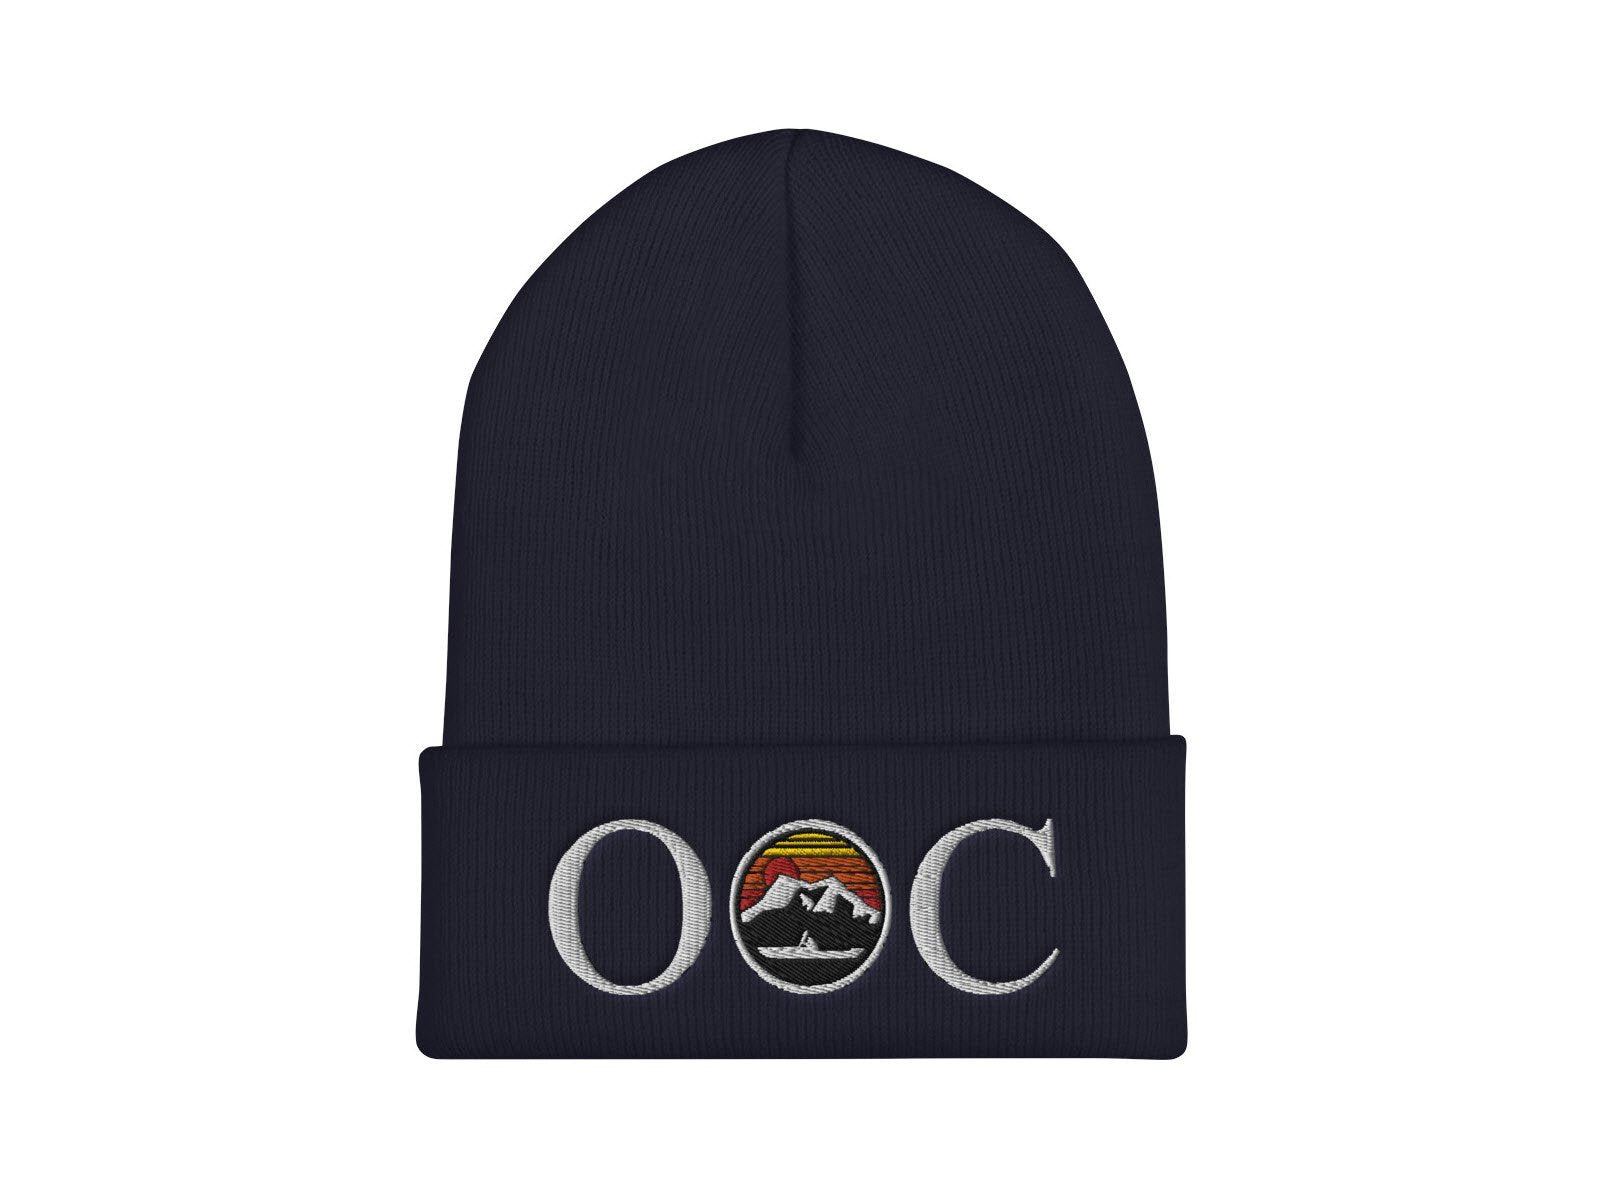 Olympic Outdoor Center OOC Logo Cuffed Beanie in Navy